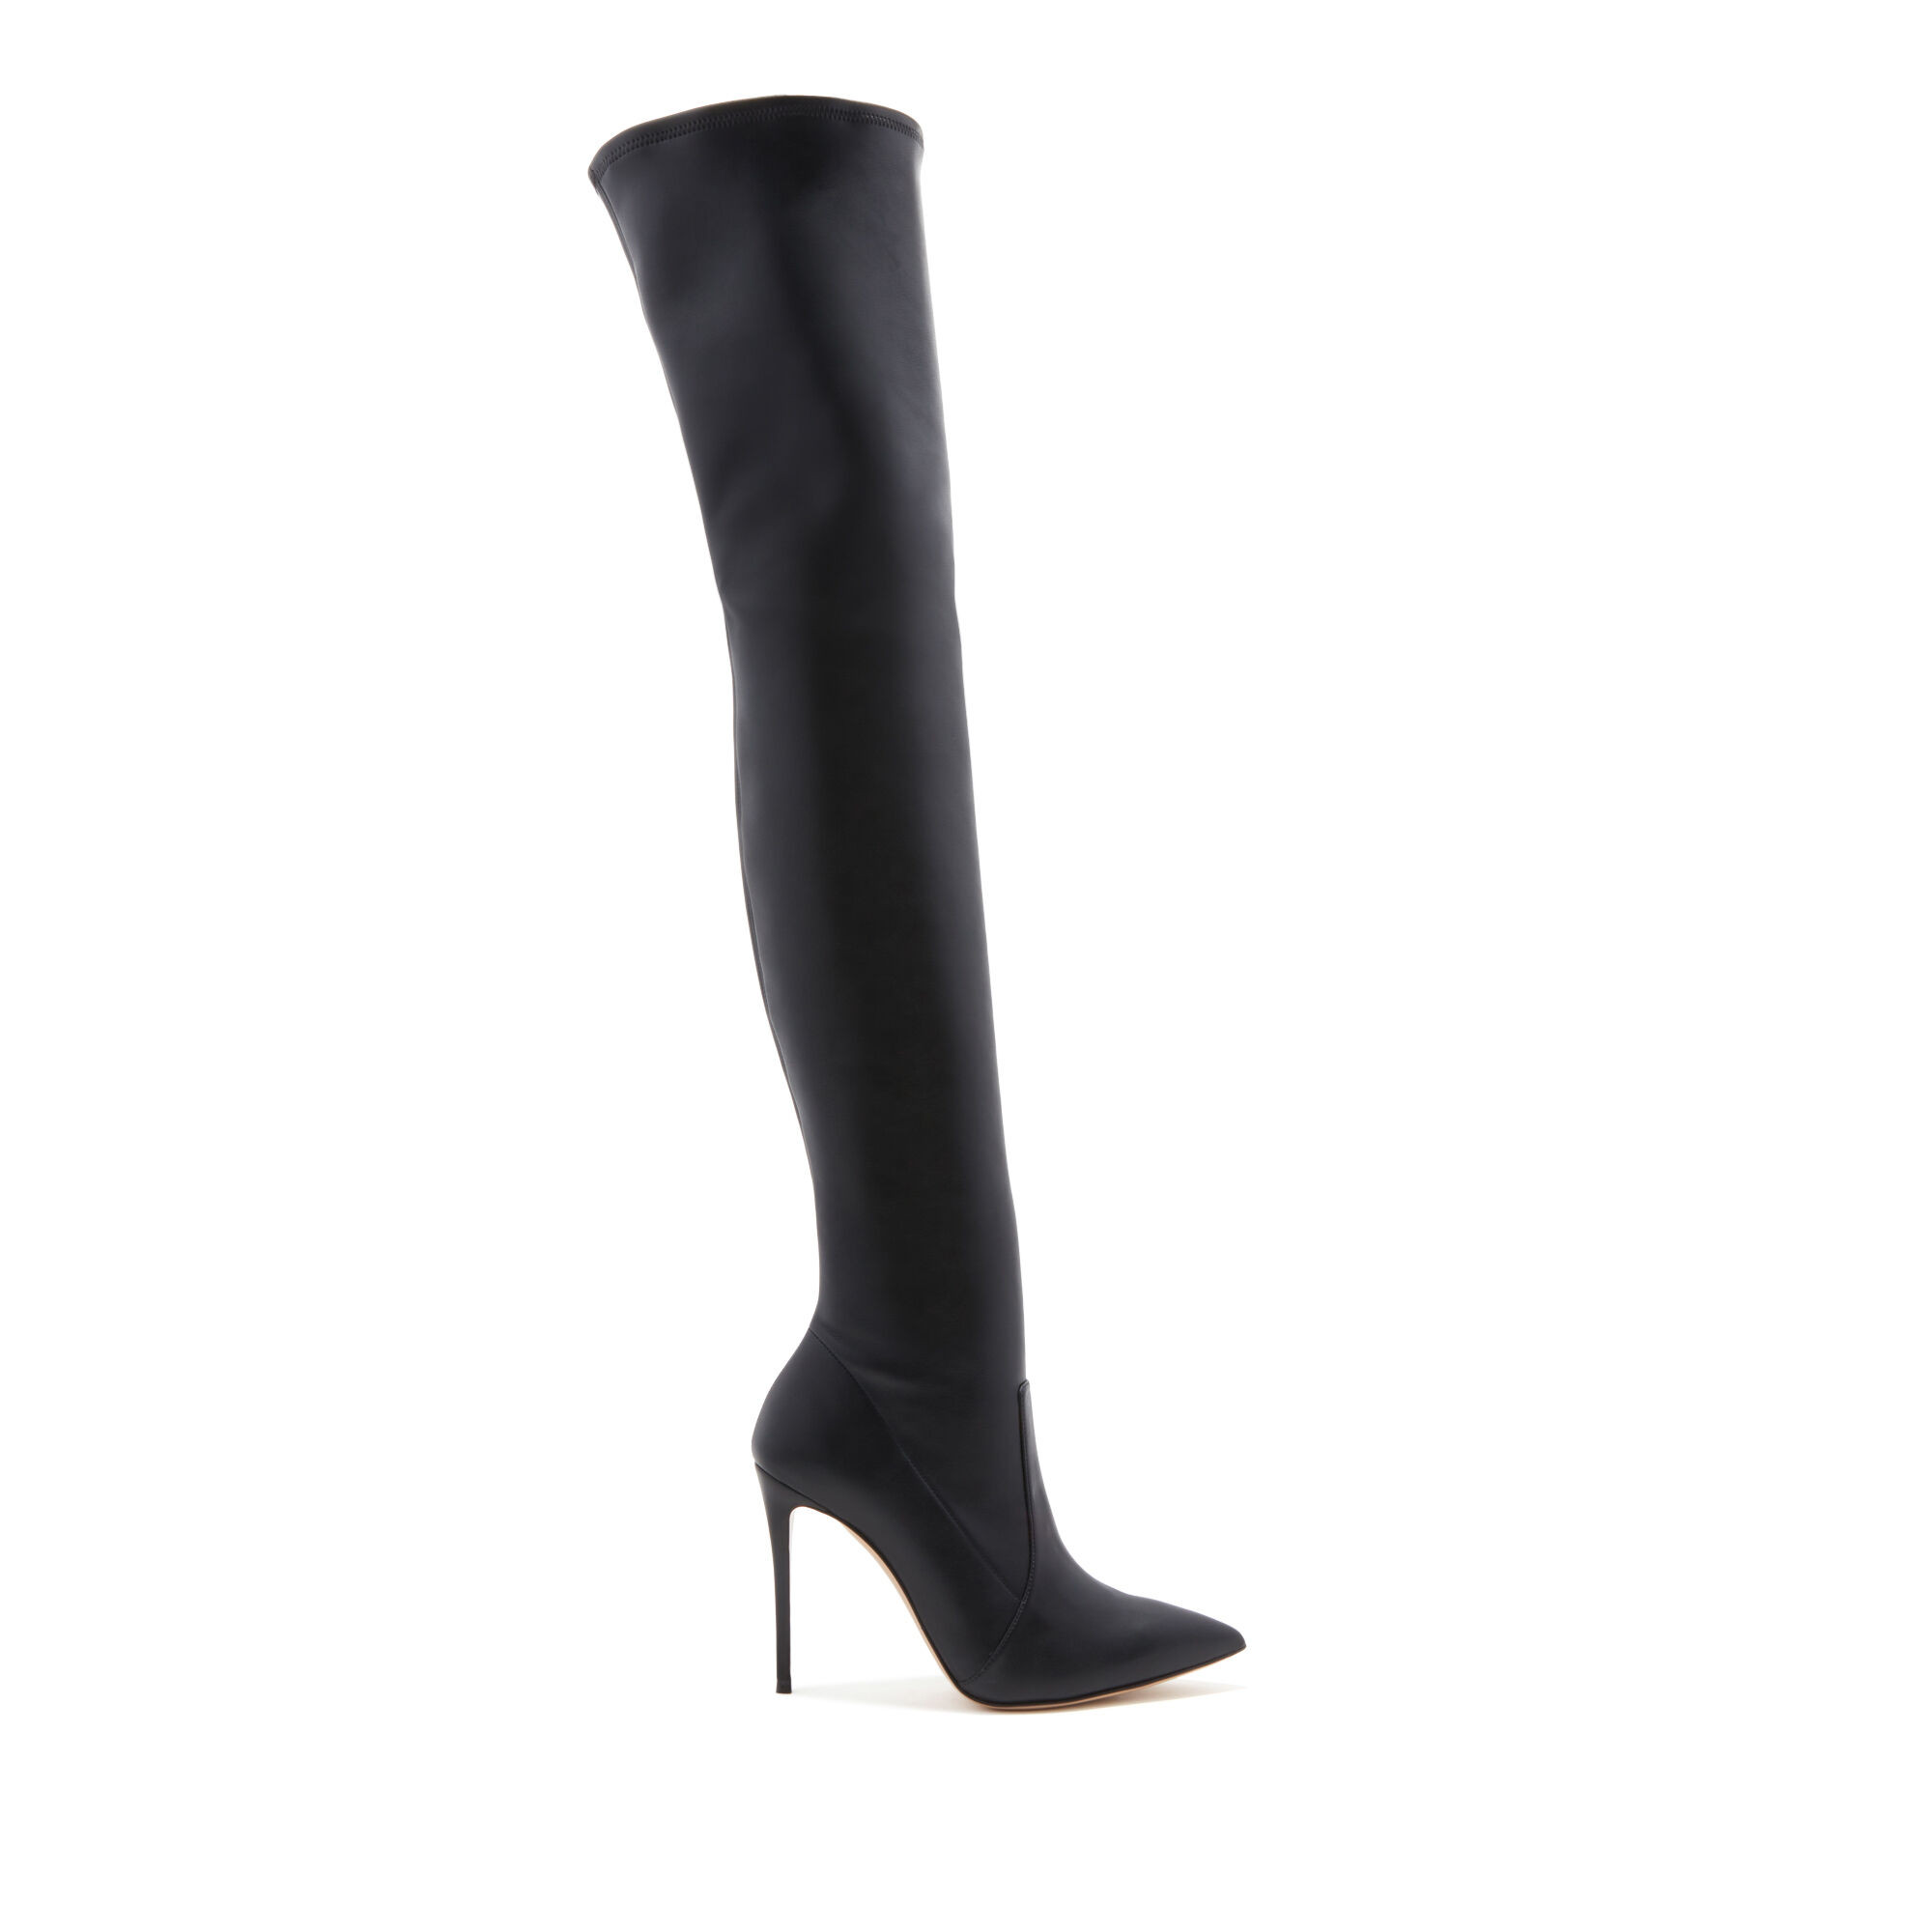 Julia over-the-knee boots